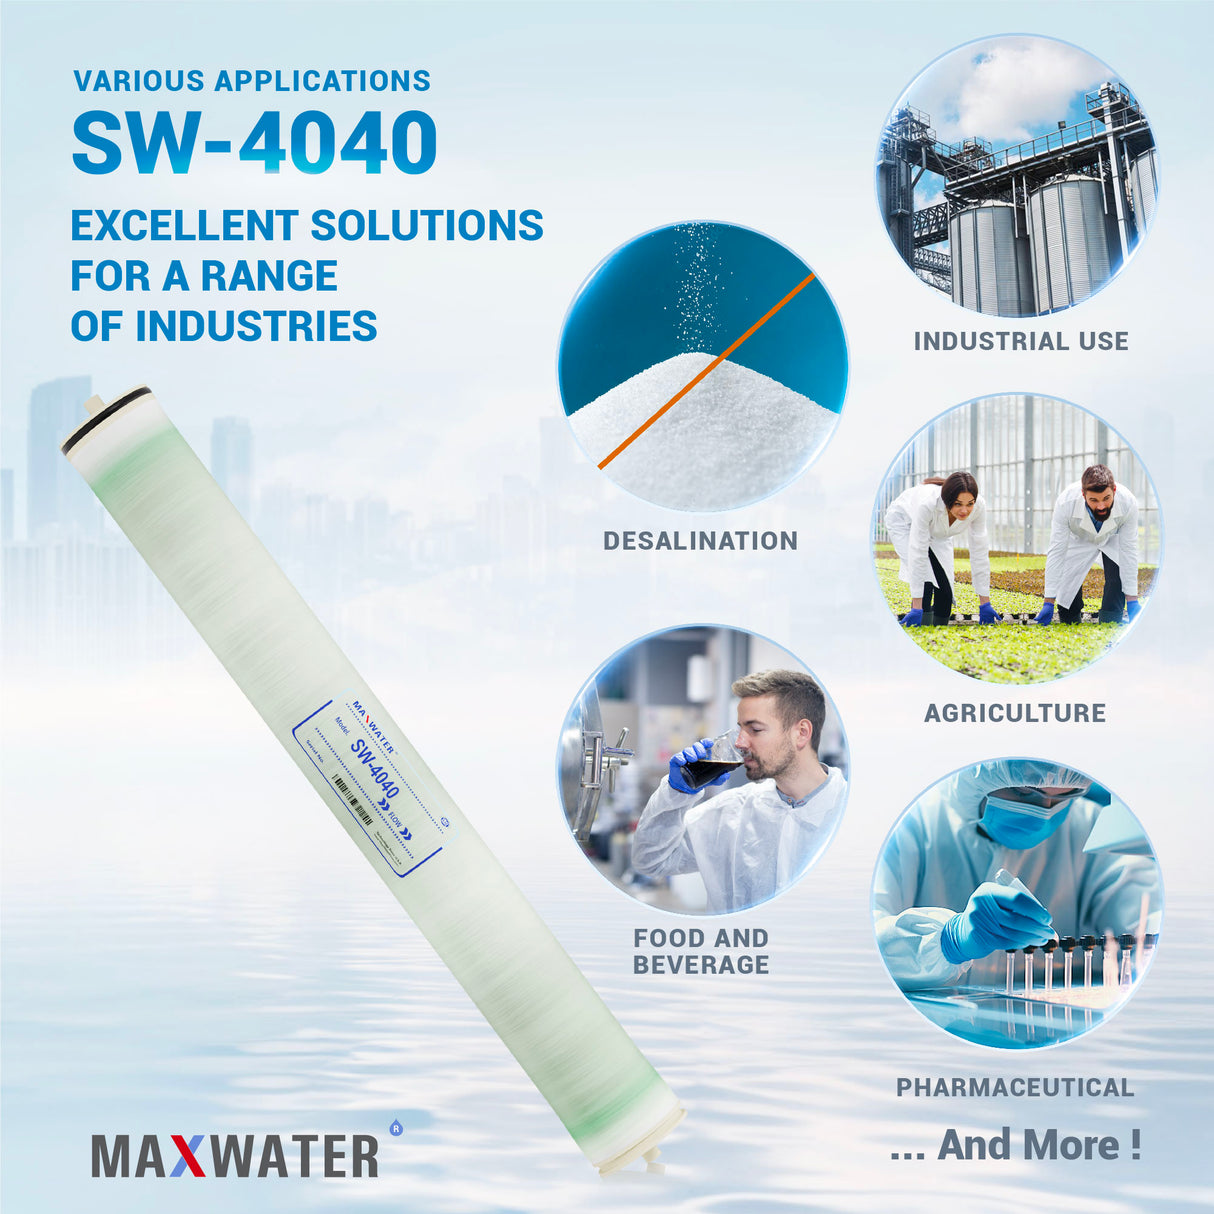 Reliable 4x40-inch RO membrane ensuring seawater purity - superior SW filtration technology.